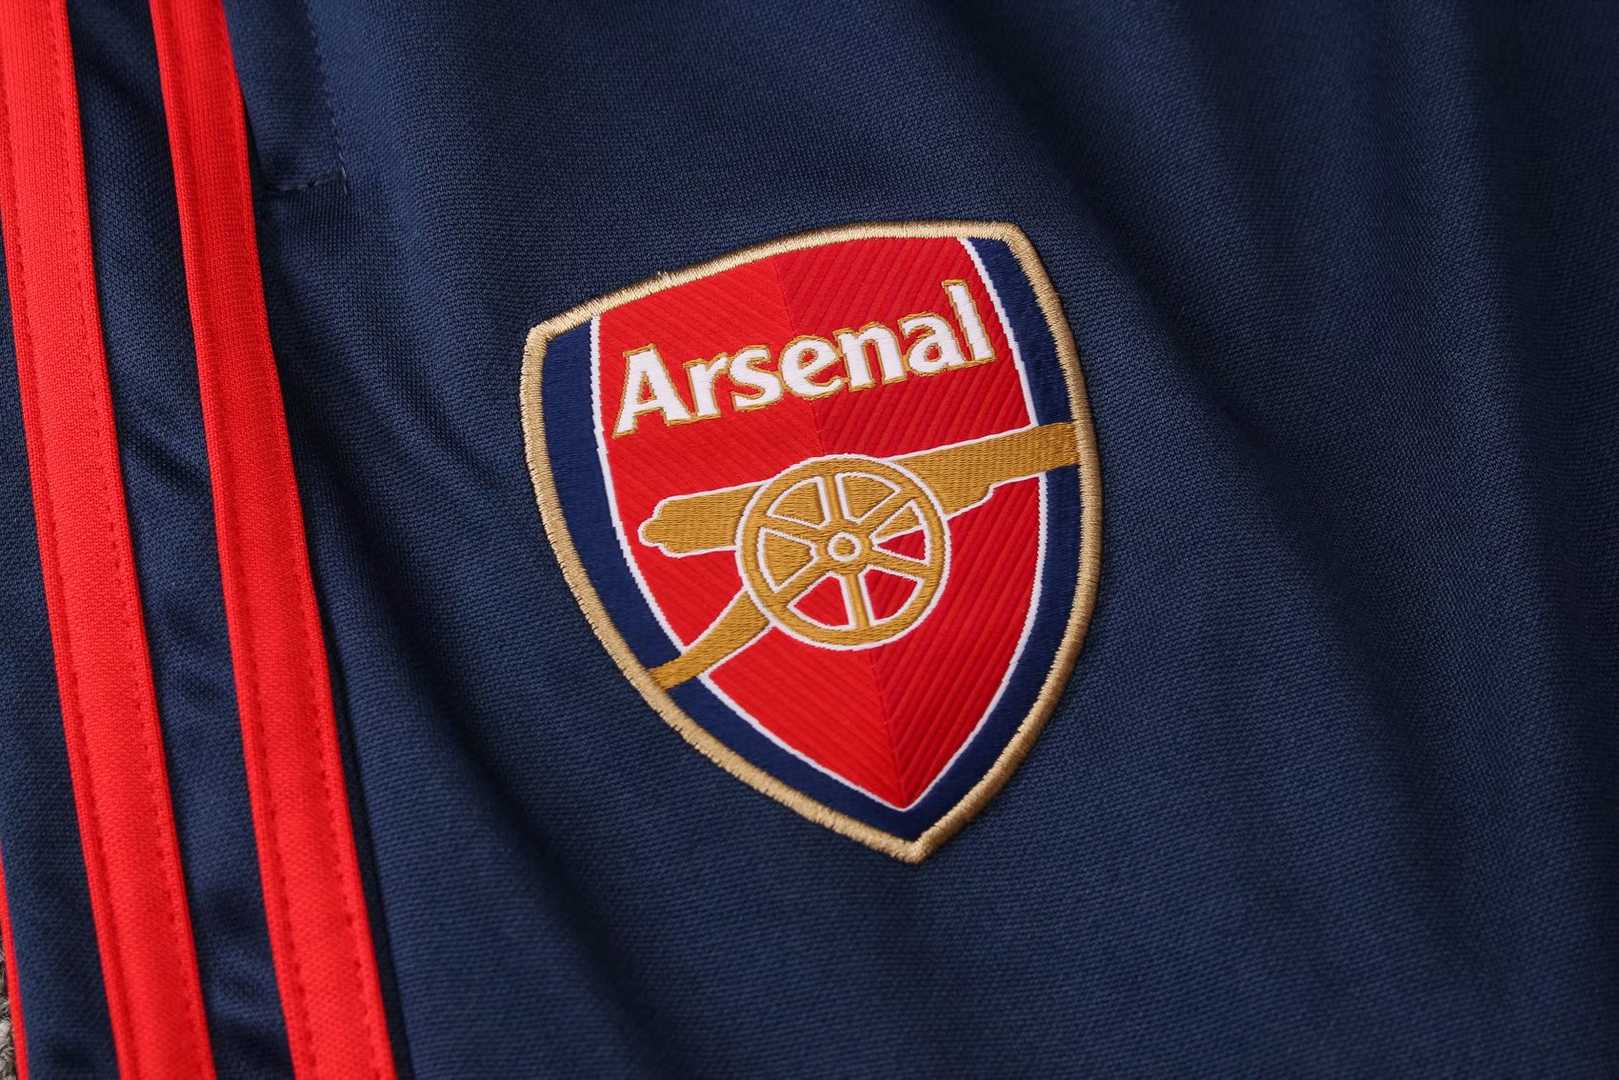 2019/20 Arsenal Red Mens Soccer Training Suit(Jacket + Pants)